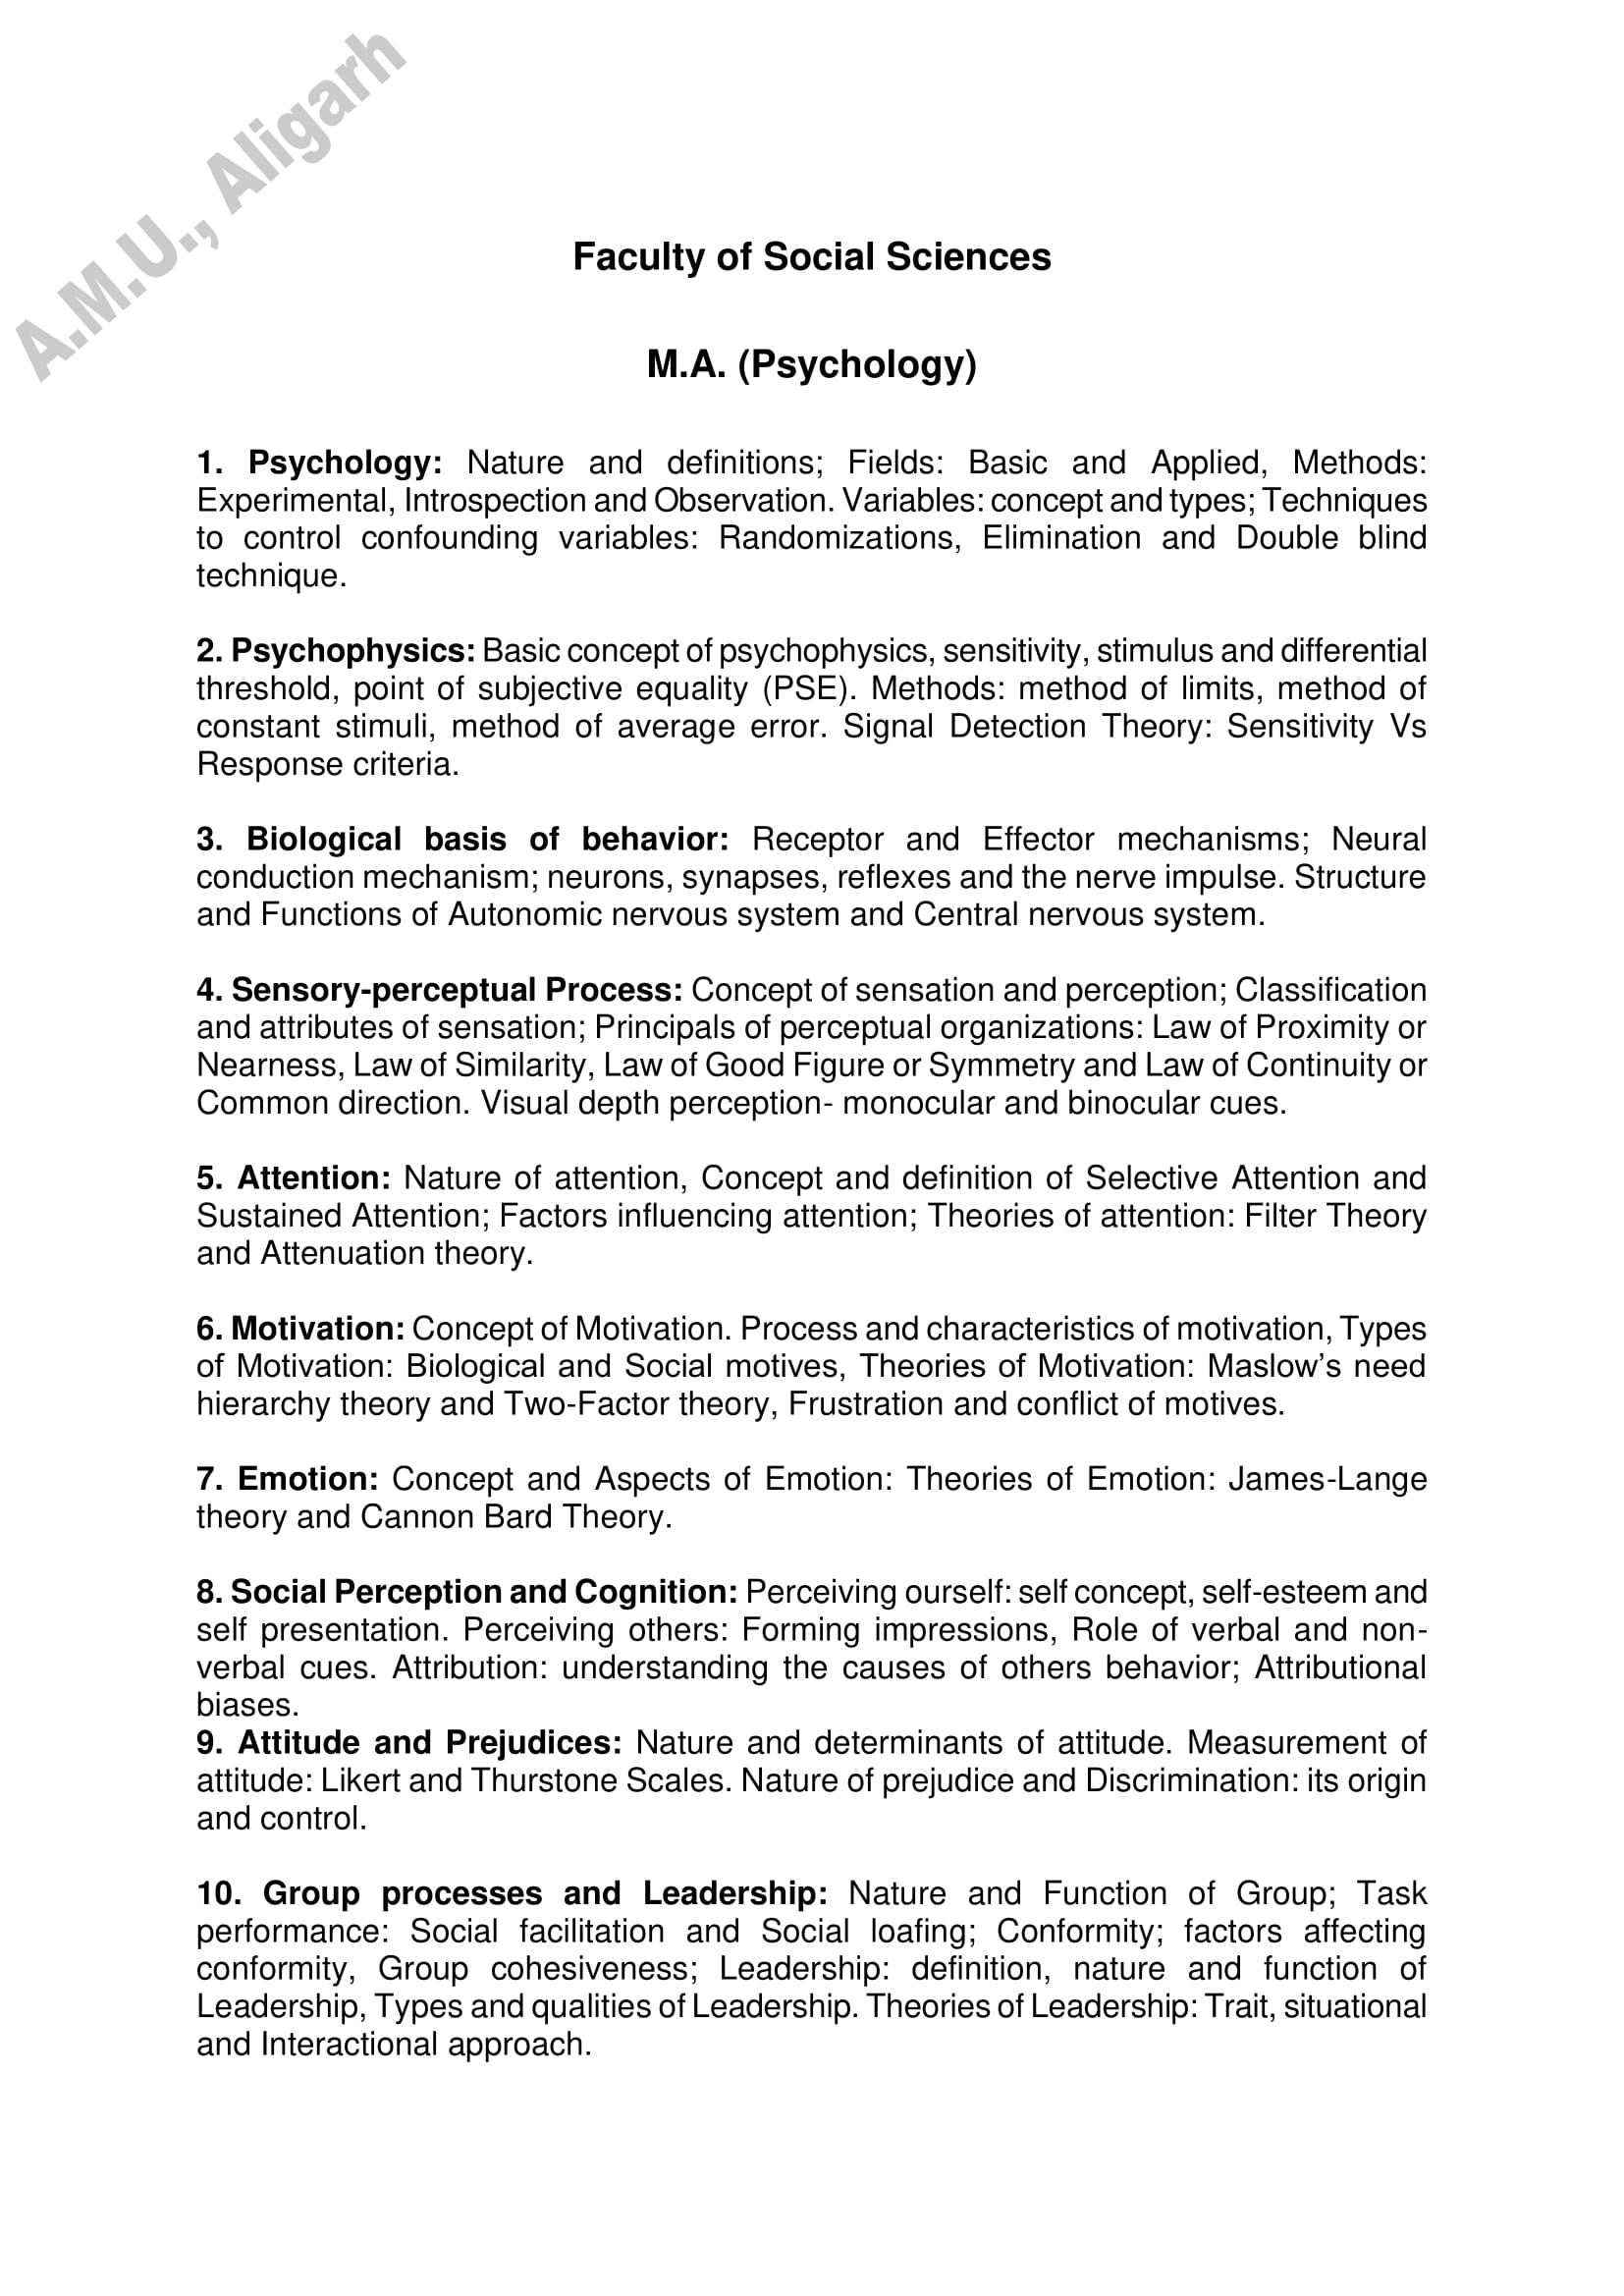 AMU Entrance Exam Syllabus for M.A. in Psychology - Page 1